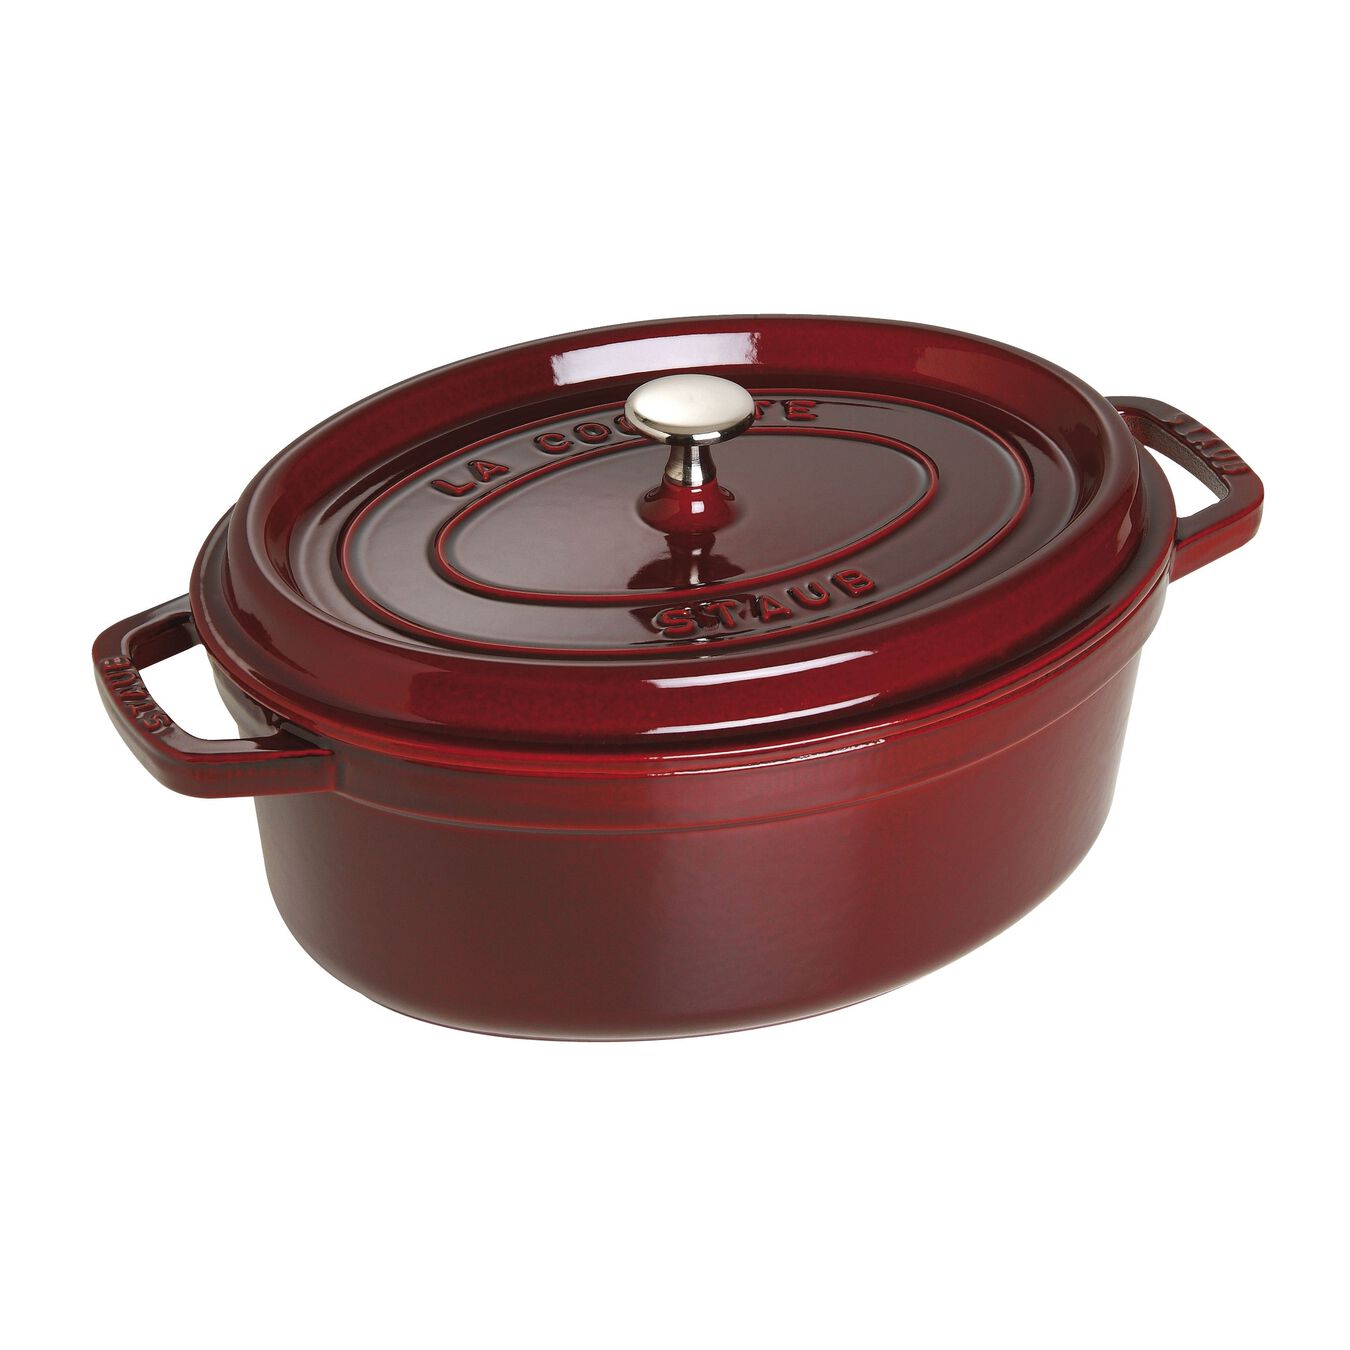 5.5 l cast iron oval Cocotte, grenadine-red,,large 2